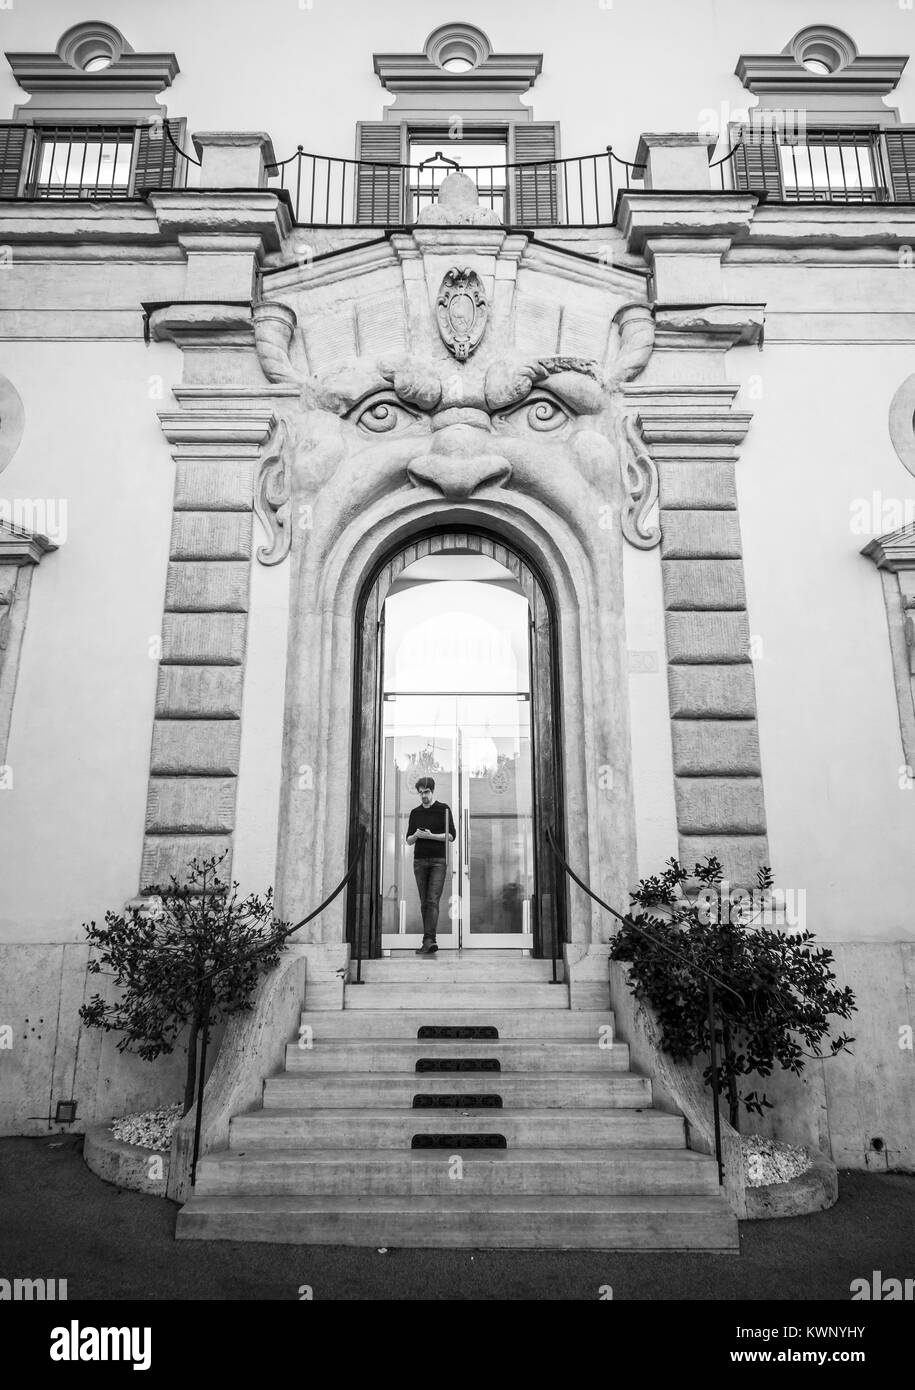 Rome (Italy) - The monumental entrance of Palazzo Zuccari near Trinità dei Monti, with the face of a monster, inspired by the monsters park of Bomarzo Stock Photo